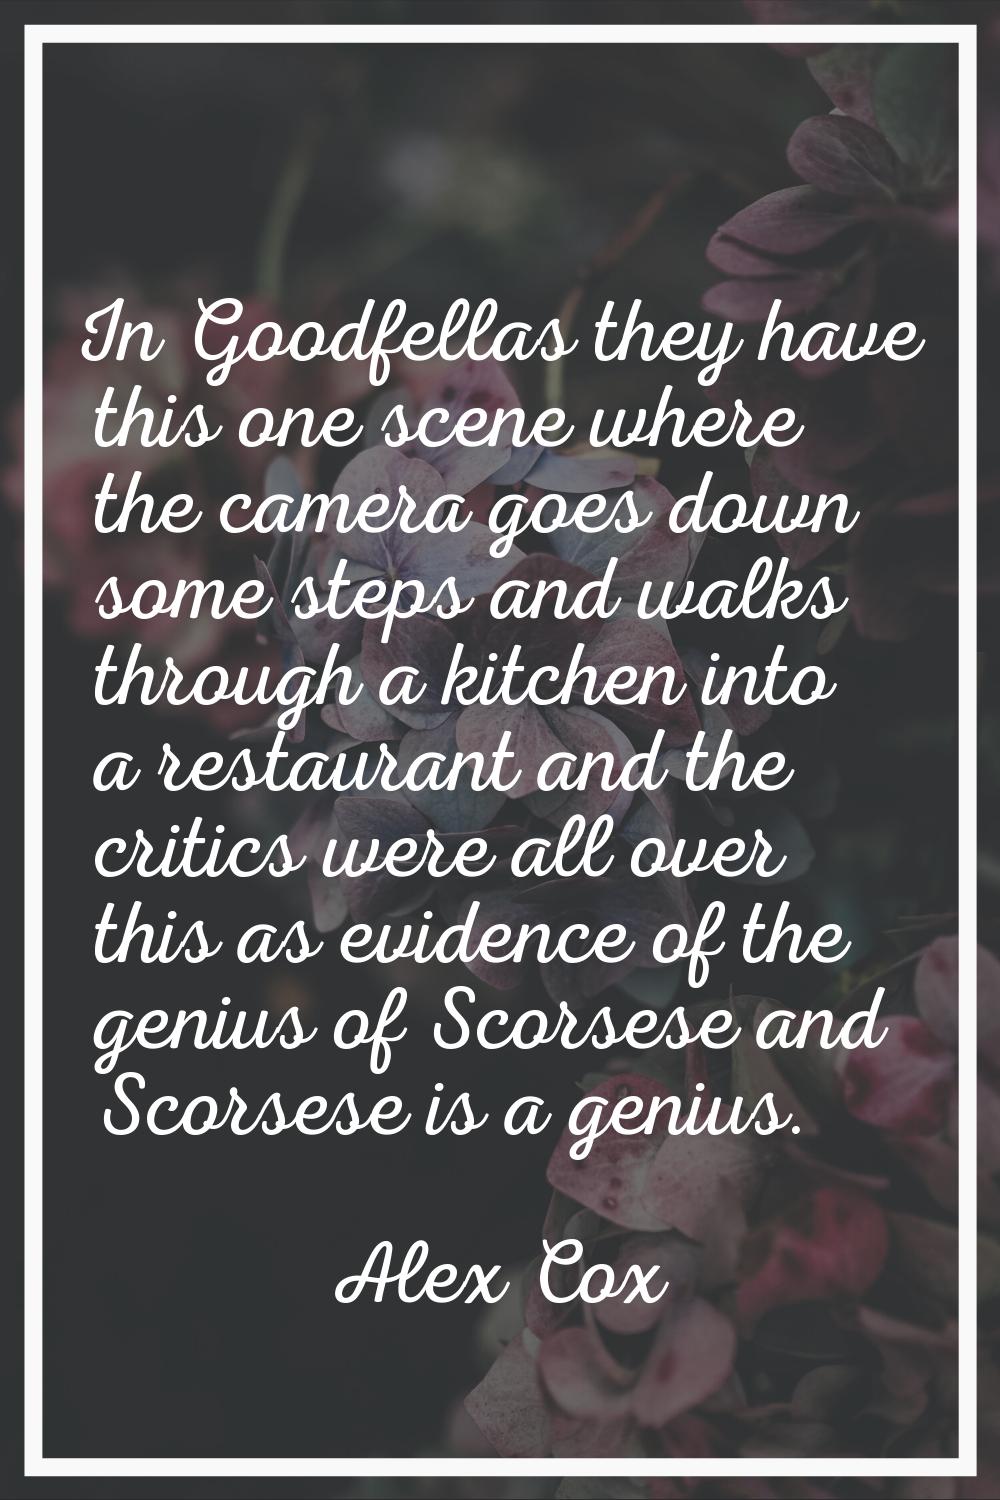 In Goodfellas they have this one scene where the camera goes down some steps and walks through a ki